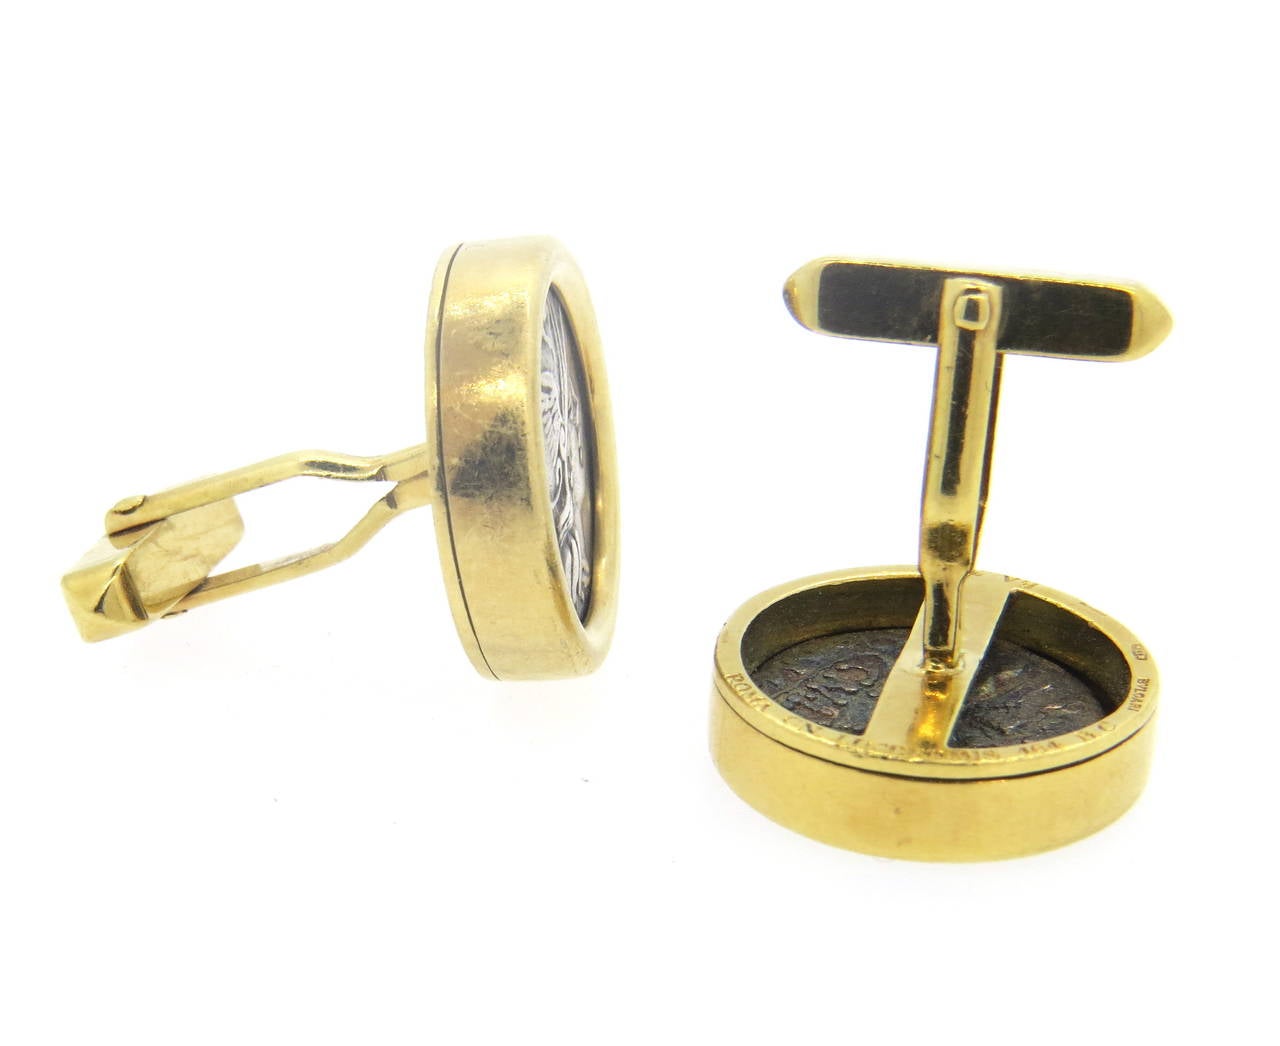 Pair of 18k yellow gold cufflinks, crafted by Bulgari, set with 16mm ancient coins. Top measures 21mm in diameter. Marked Bvlgari, 750, Roma-Pinarius,164 B C, 200 B C.  Weight - 27.2 grams